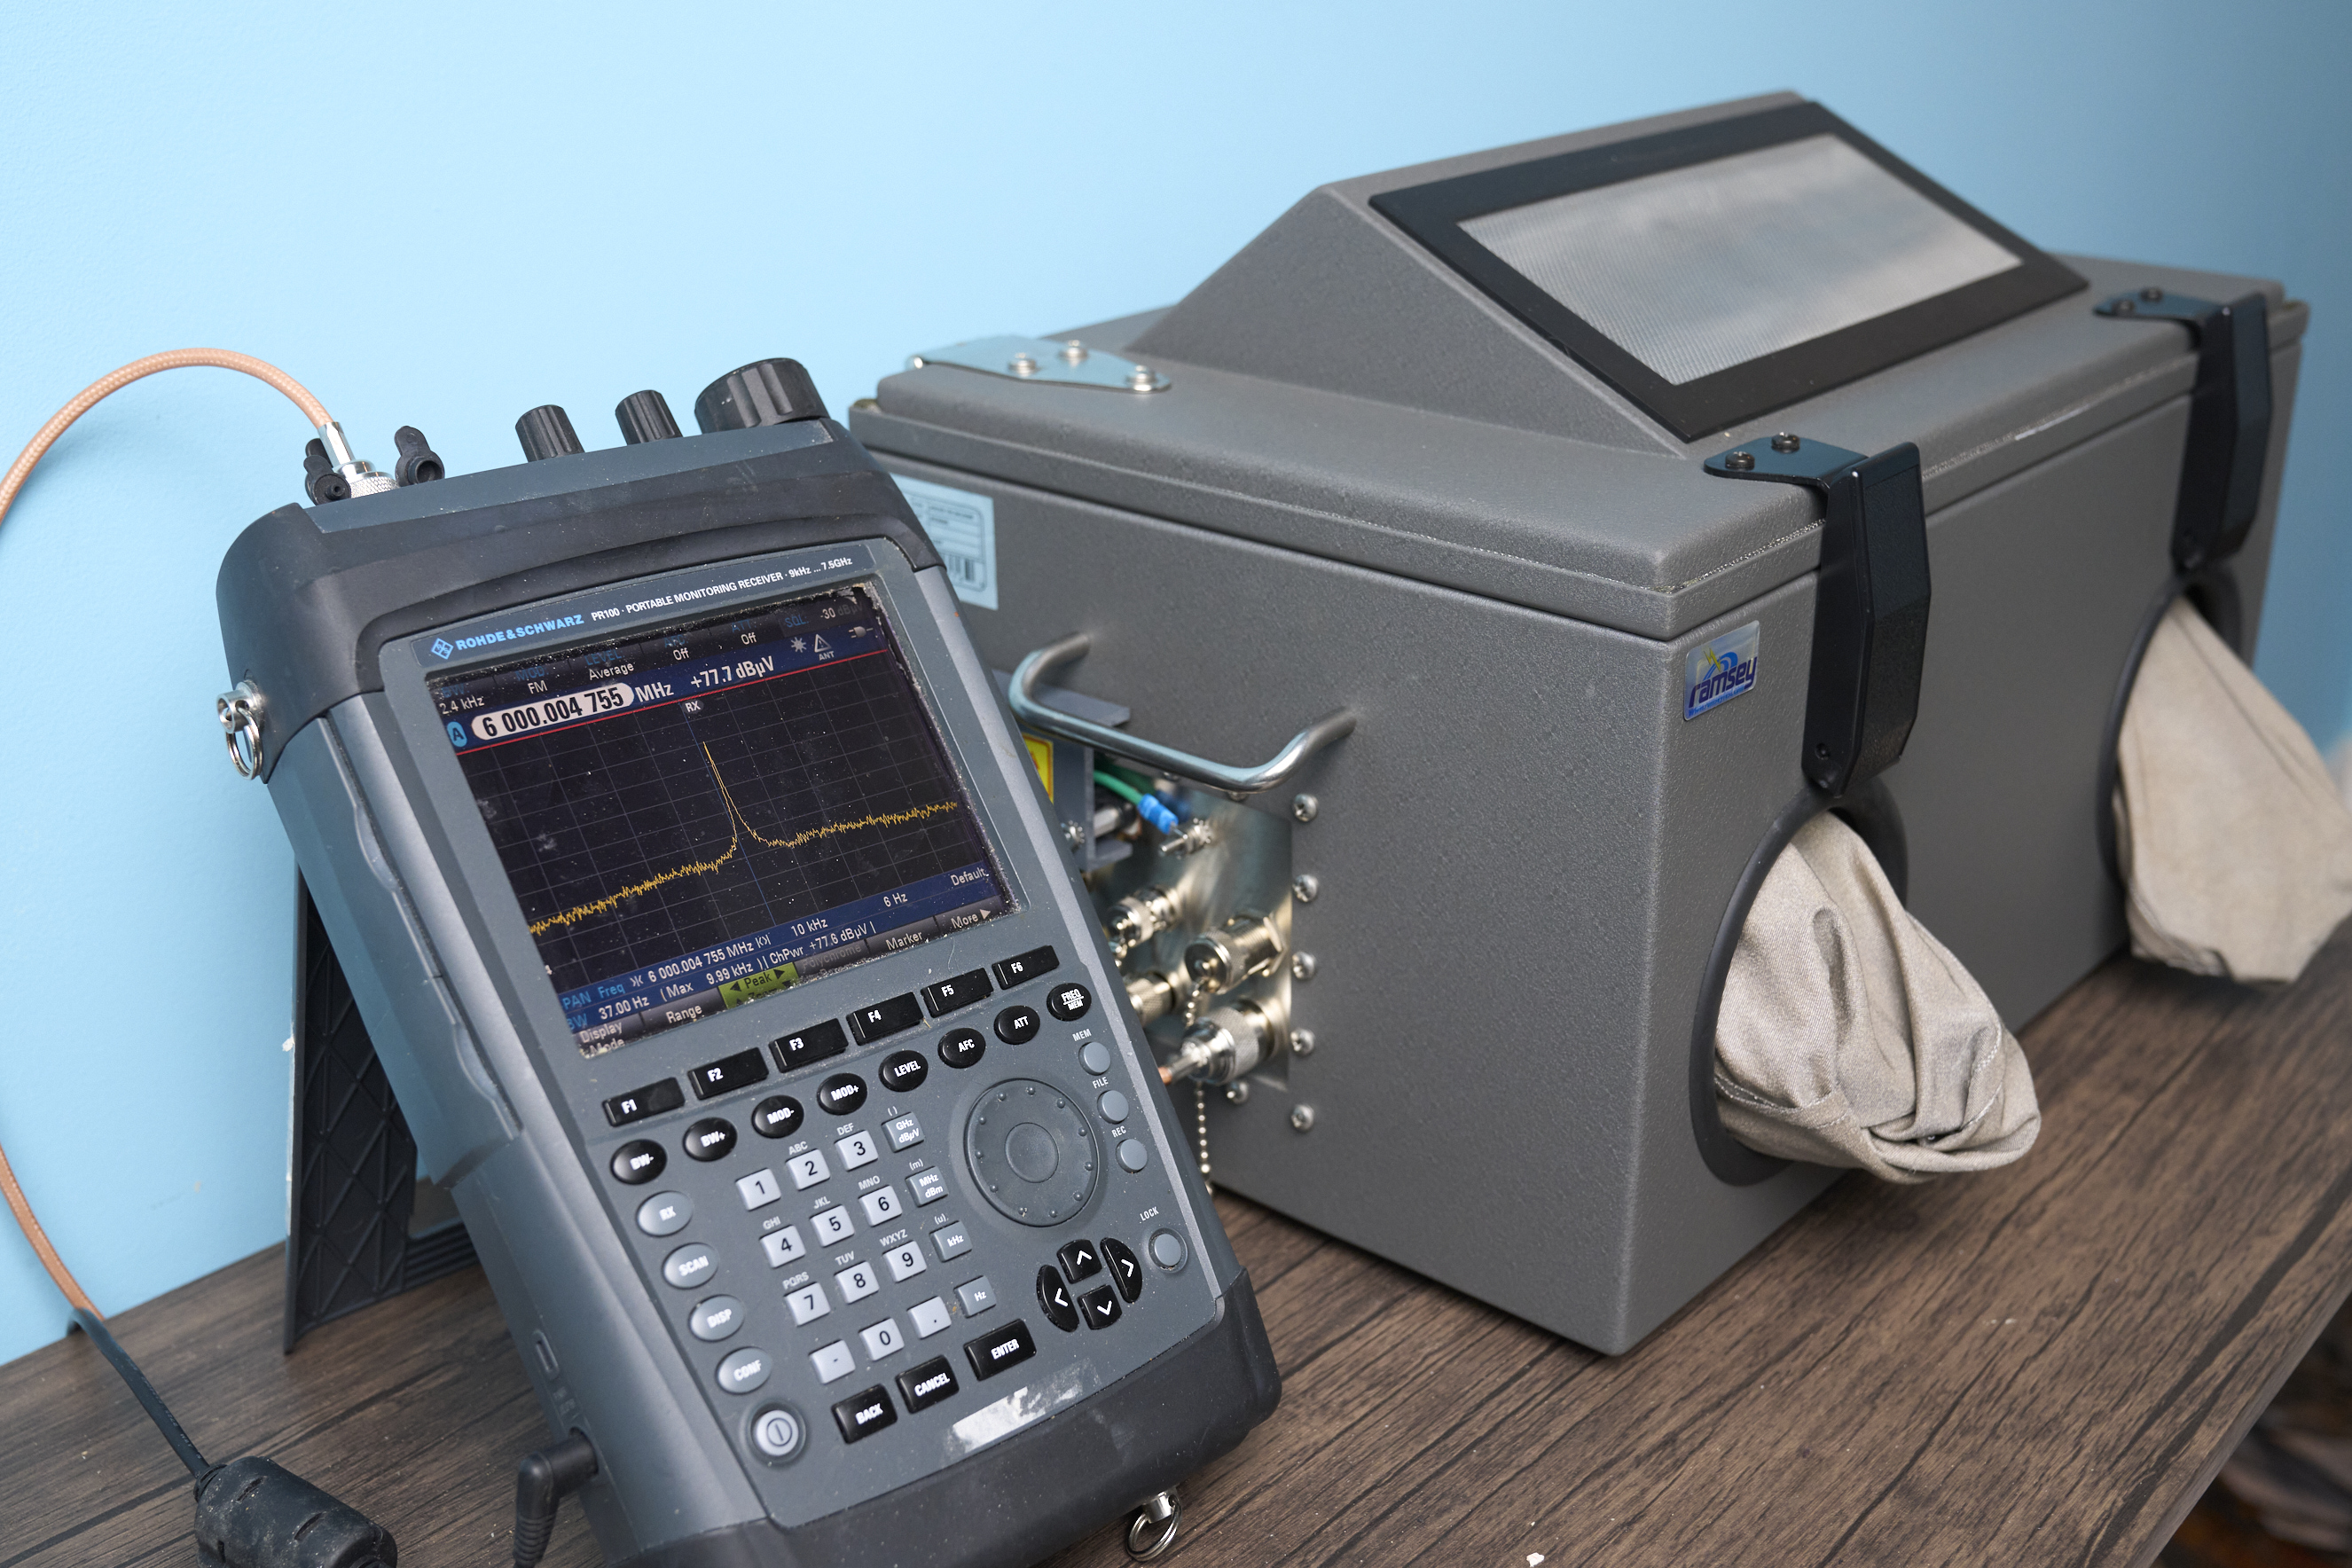 A photo showing a Rohde & Schwarz PR100 portable receiver next to a Ramsey Electronics model STE3000B RF test chamber. The PR100 is a dark grey flat tapered rubber-encased rectangle with lots of buttons and a large screen; the screen displays a fine orange line showing a peak at the center. The STE3000B looks like a cross between a brutalist cash register and an ice box that has turned out its pockets to show that it doesn't have any change. Most of the exterior is metal, in a gunmetal shade of grey that means business.